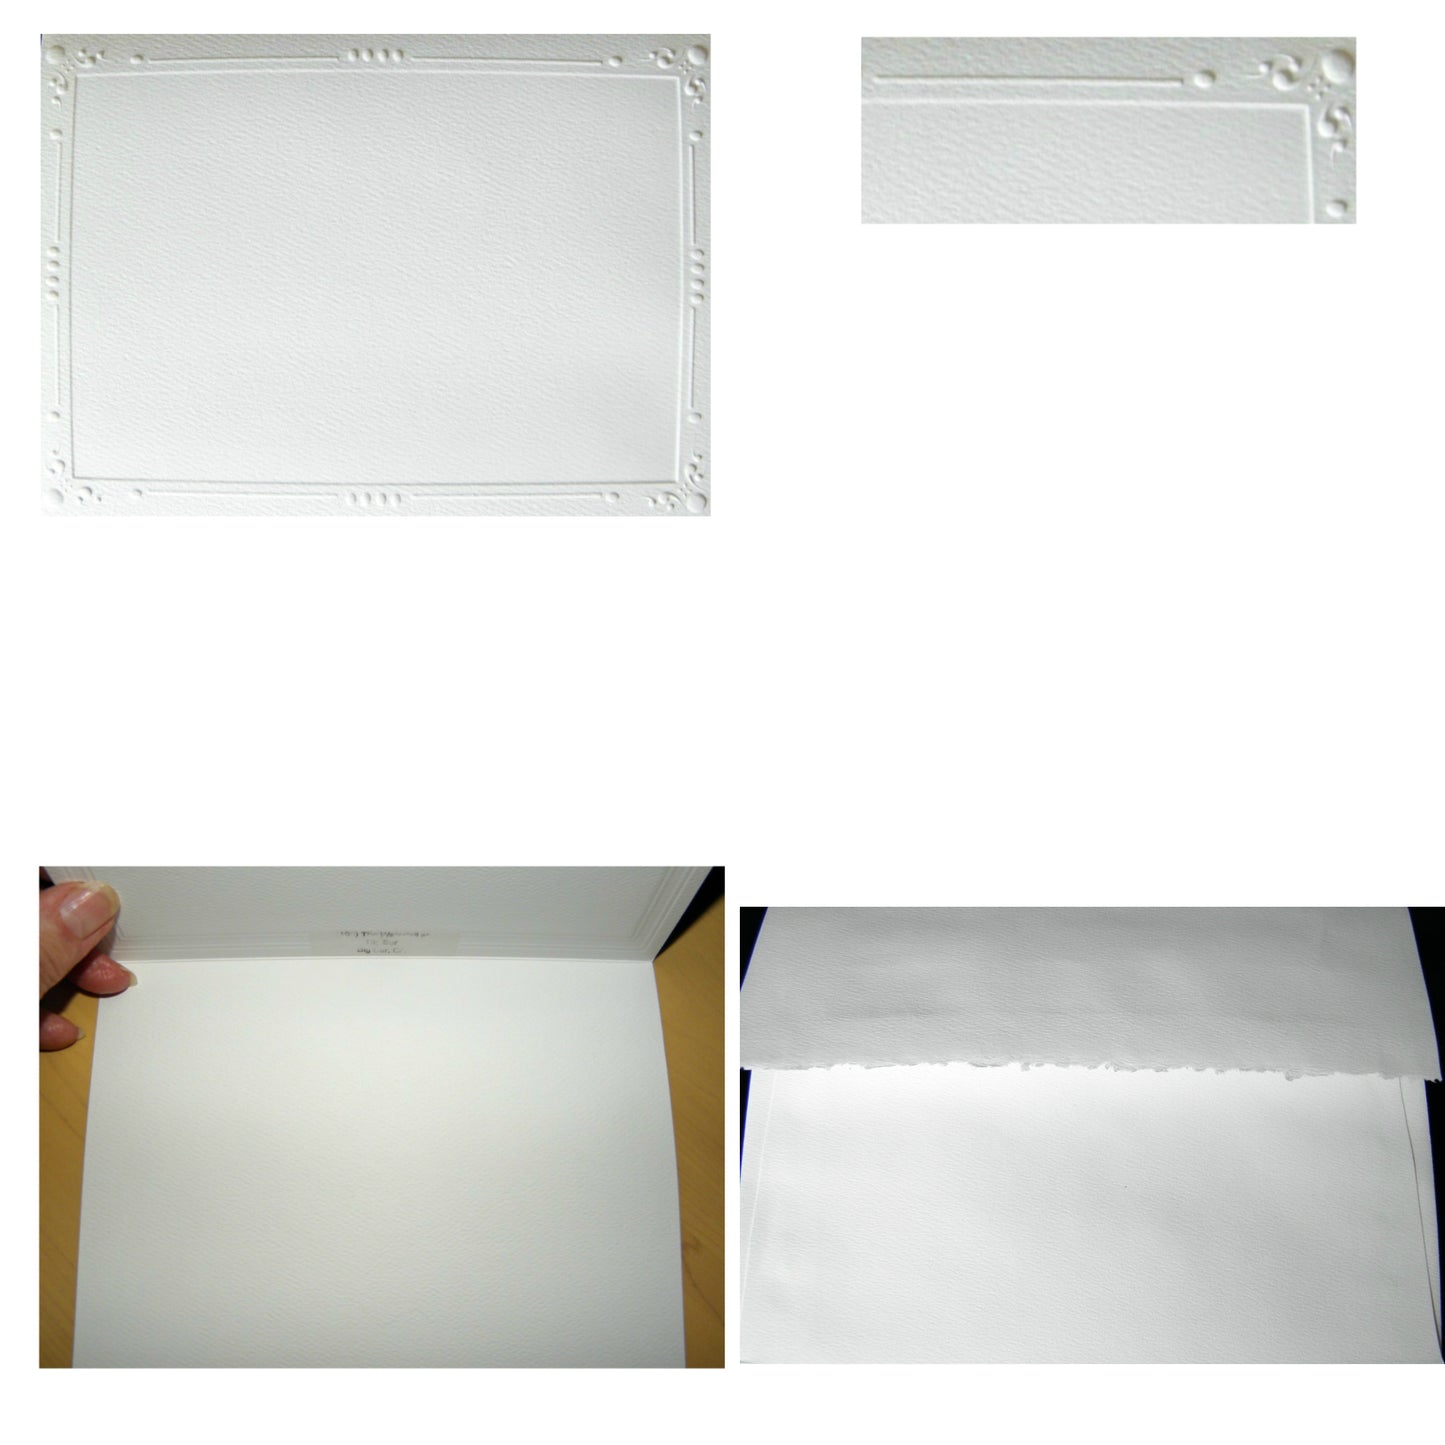 A photo collage of the Decorative card stock and envelope